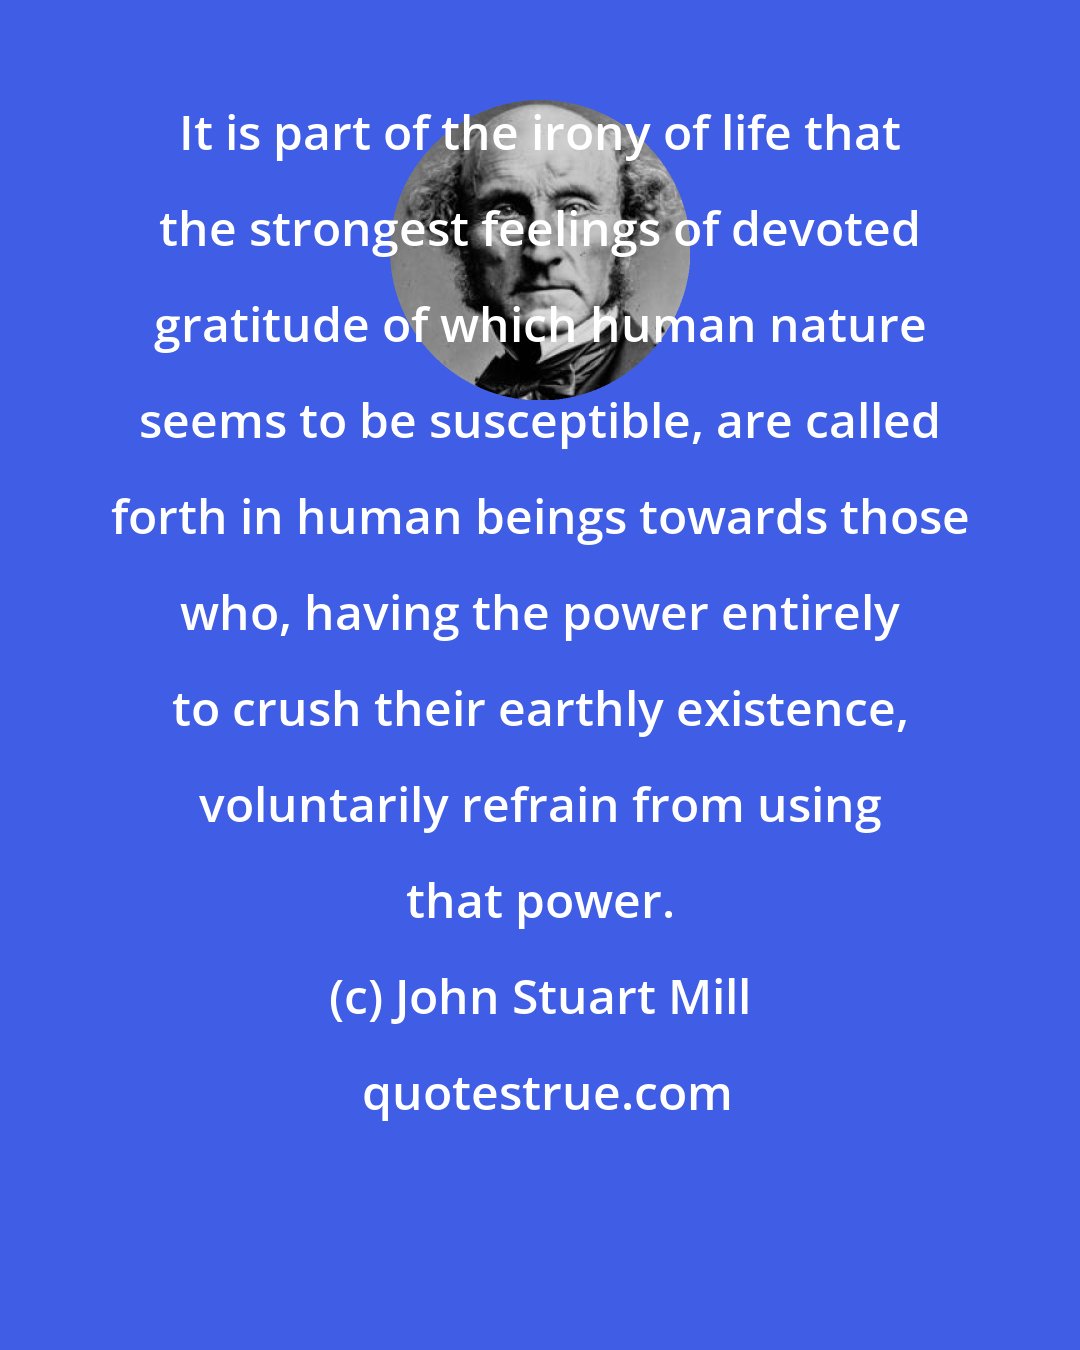 John Stuart Mill: It is part of the irony of life that the strongest feelings of devoted gratitude of which human nature seems to be susceptible, are called forth in human beings towards those who, having the power entirely to crush their earthly existence, voluntarily refrain from using that power.